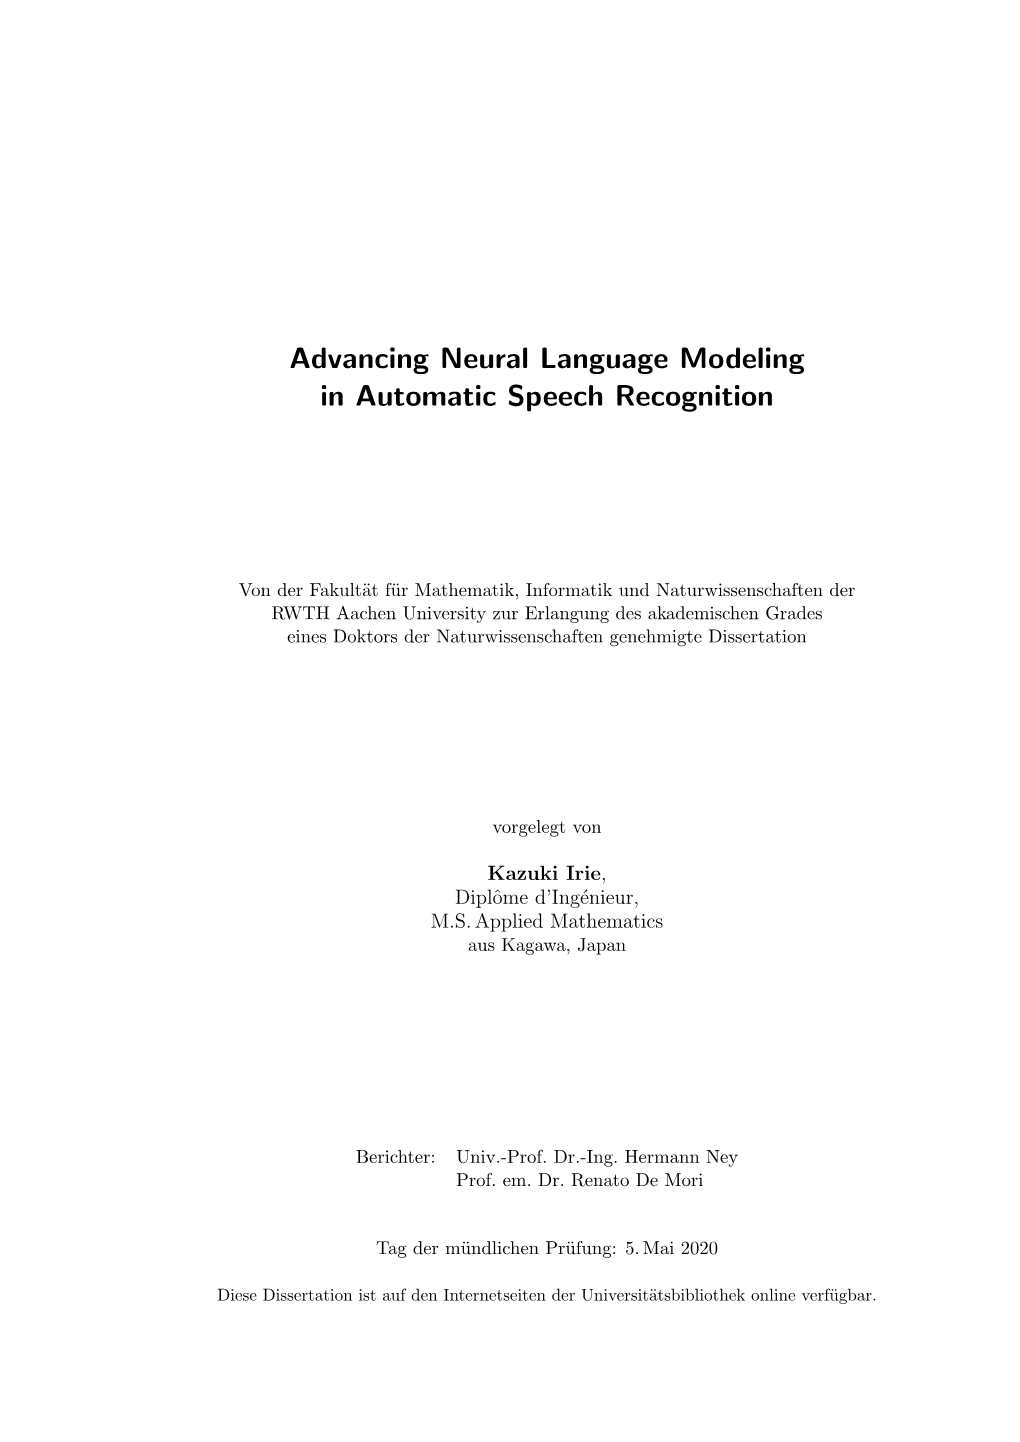 Advancing Neural Language Modeling in Automatic Speech Recognition